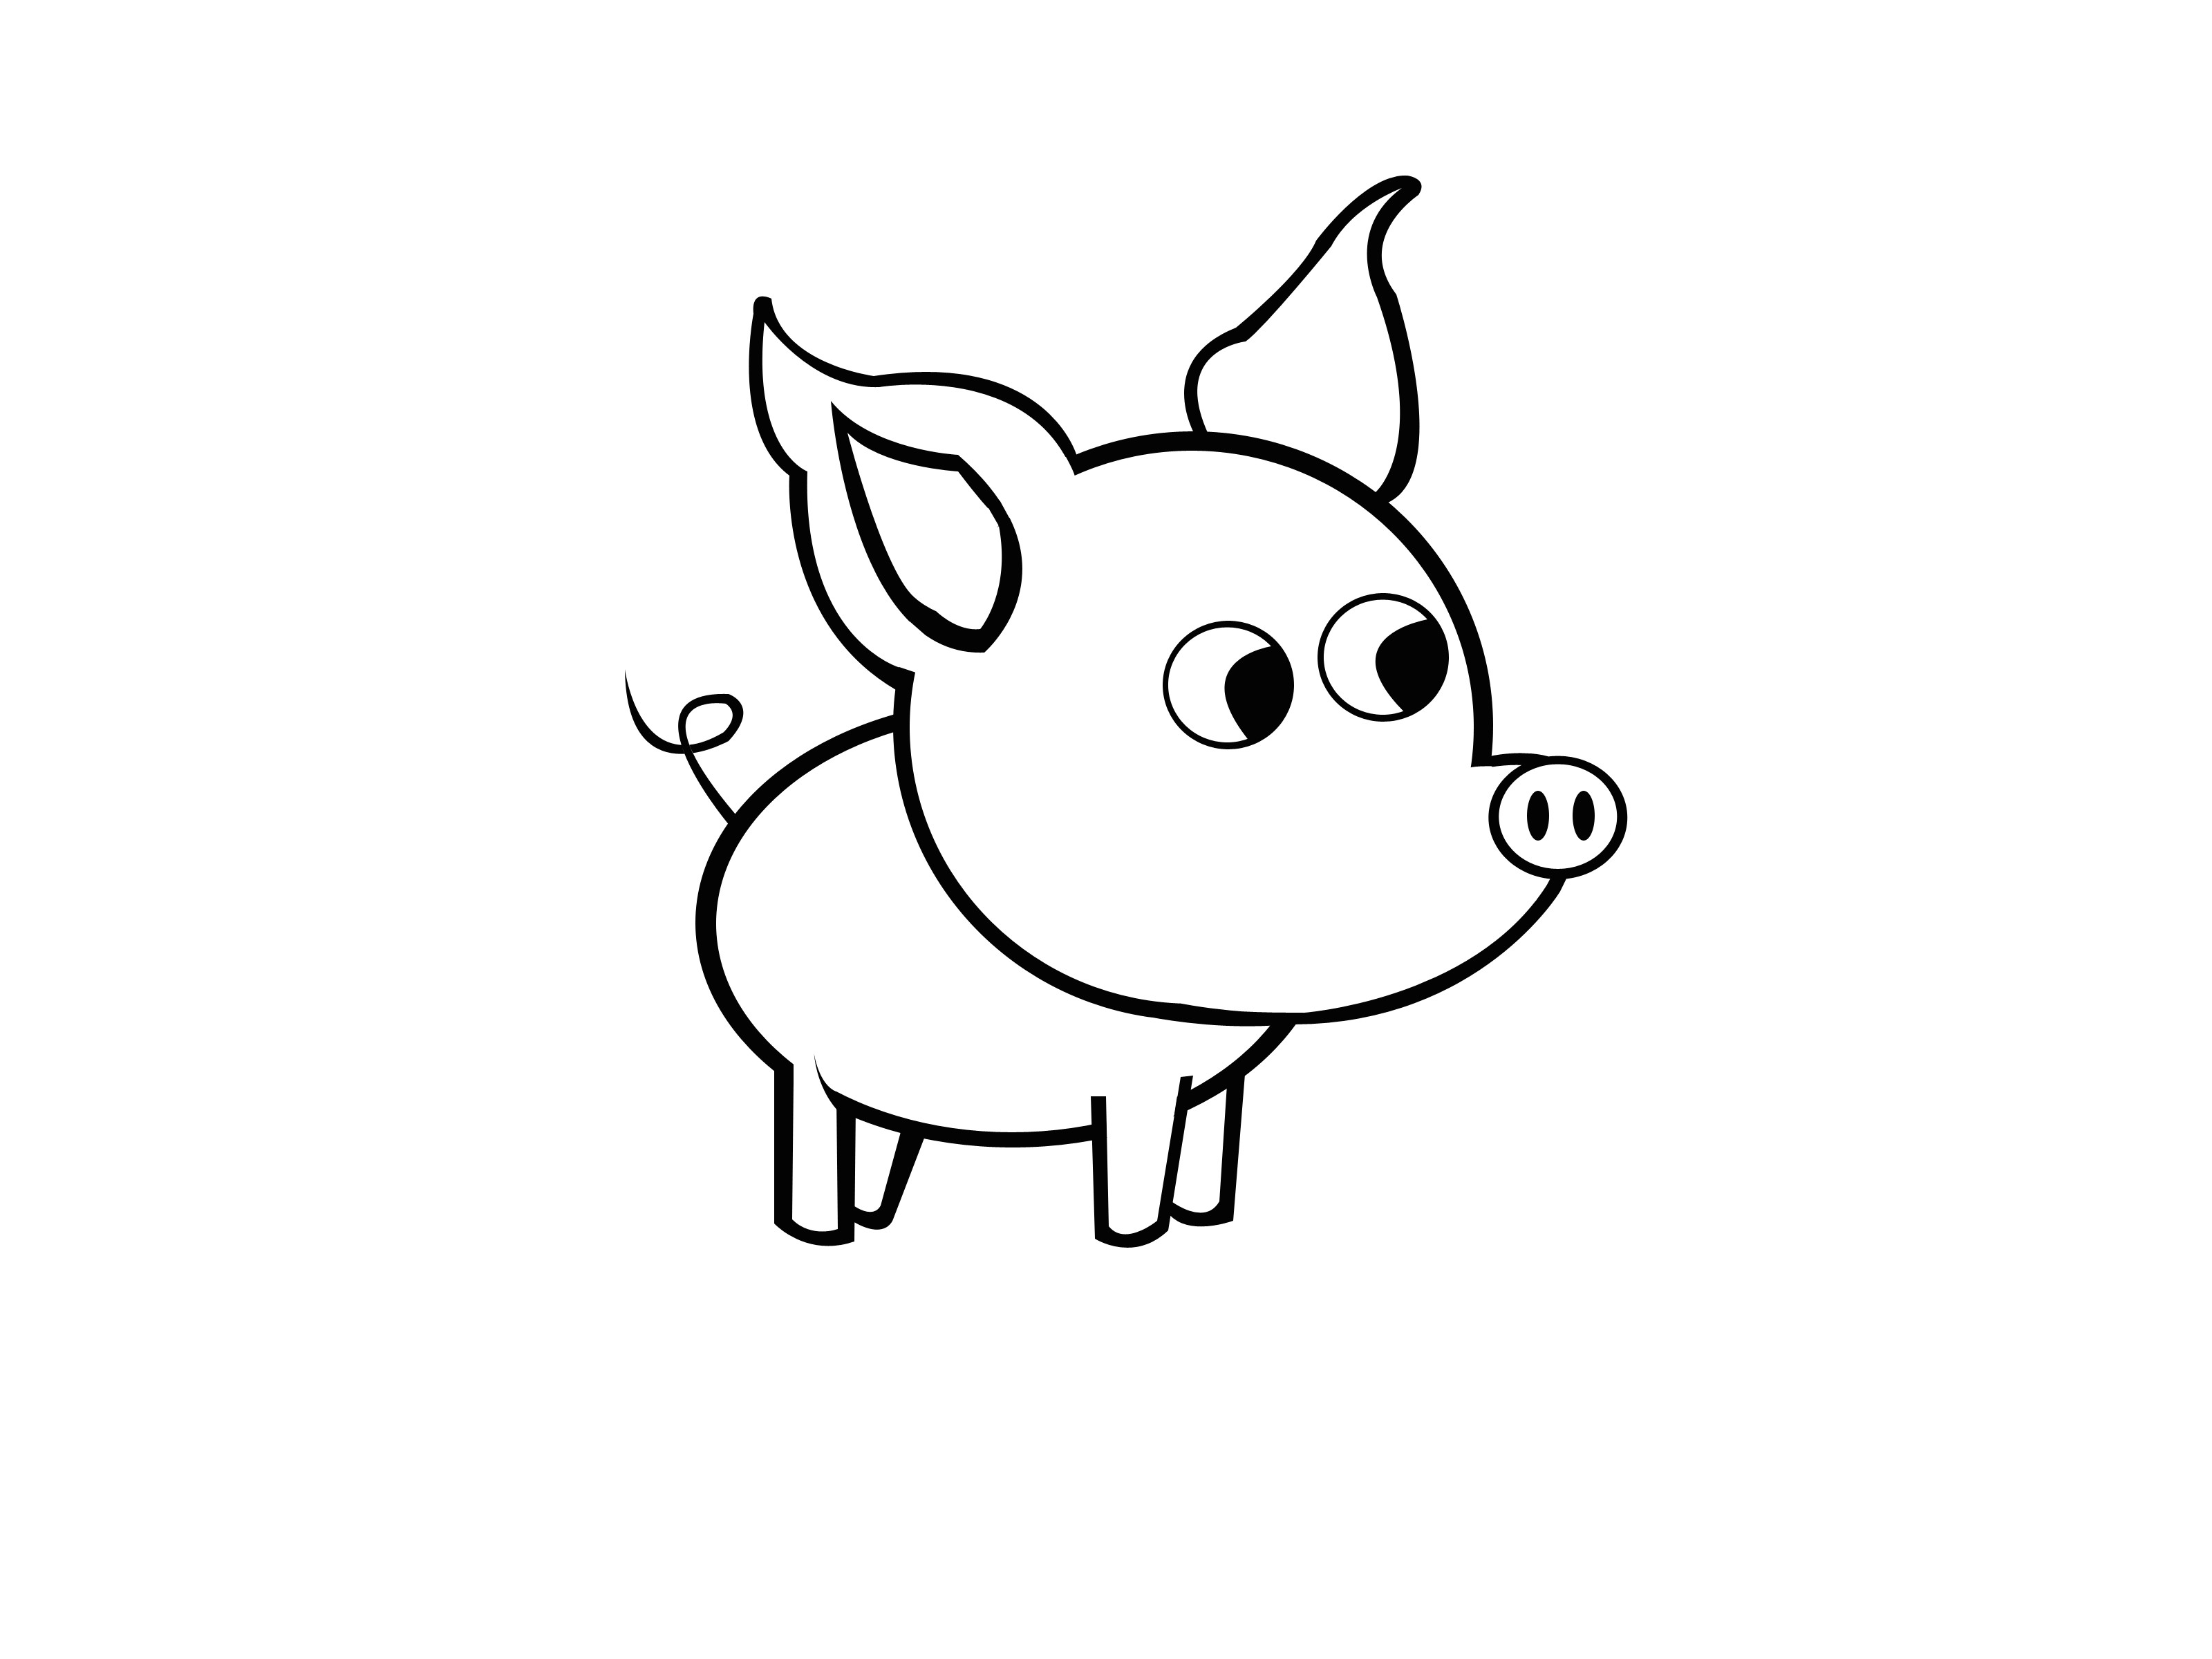 Easy Drawings Pig How to Draw A Simple Pig 9 Steps with Pictures Wikihow